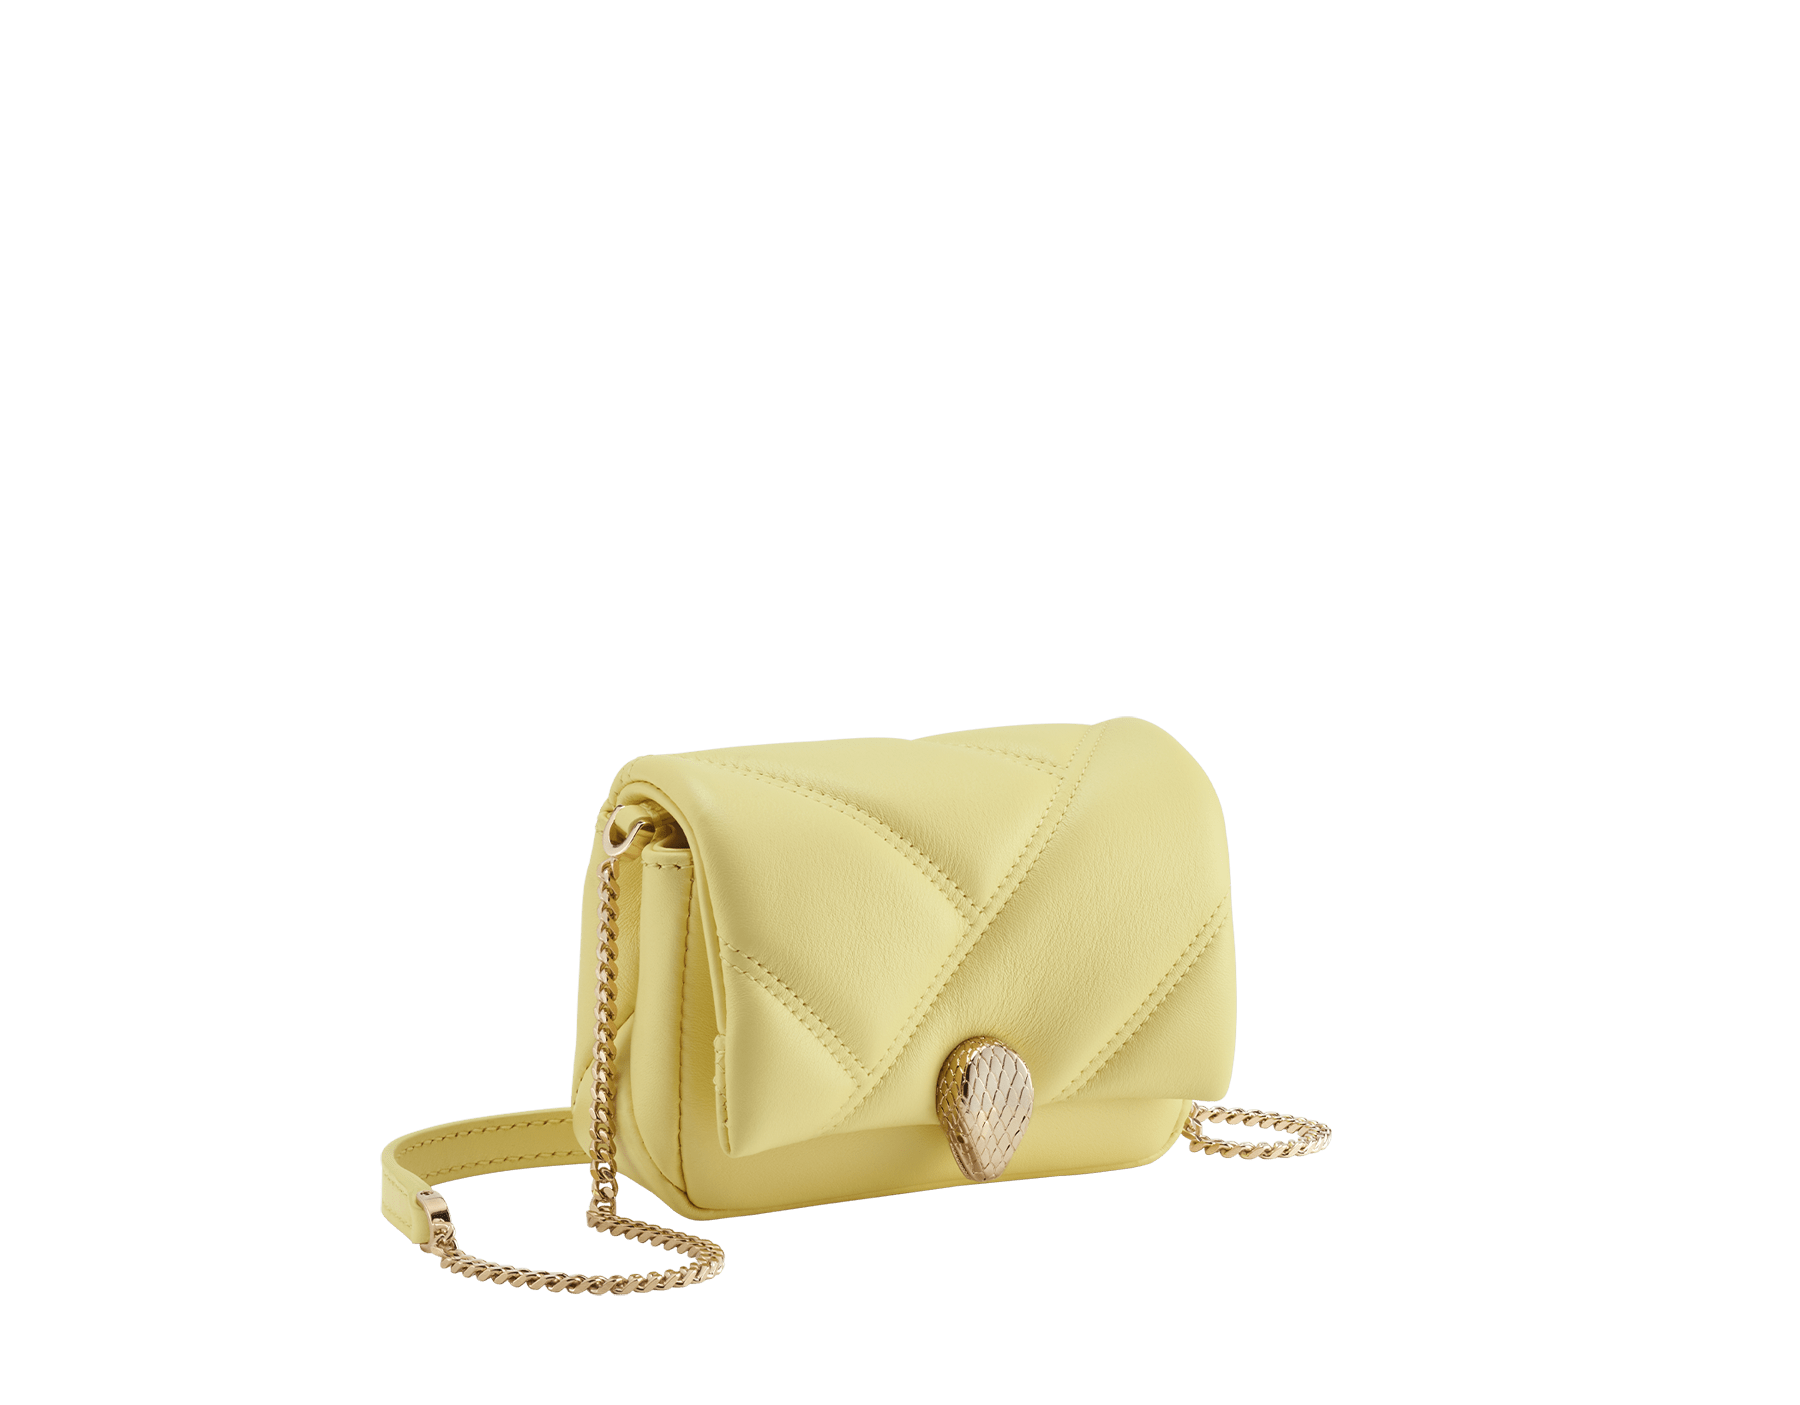 Serpenti Cabochon micro bag in ivory opal calf leather with a maxi matelassé pattern and black nappa leather lining. Captivating snakehead closure in gold-plated brass embellished with red enamel eyes. SCB-NANOCABOCHON image 1